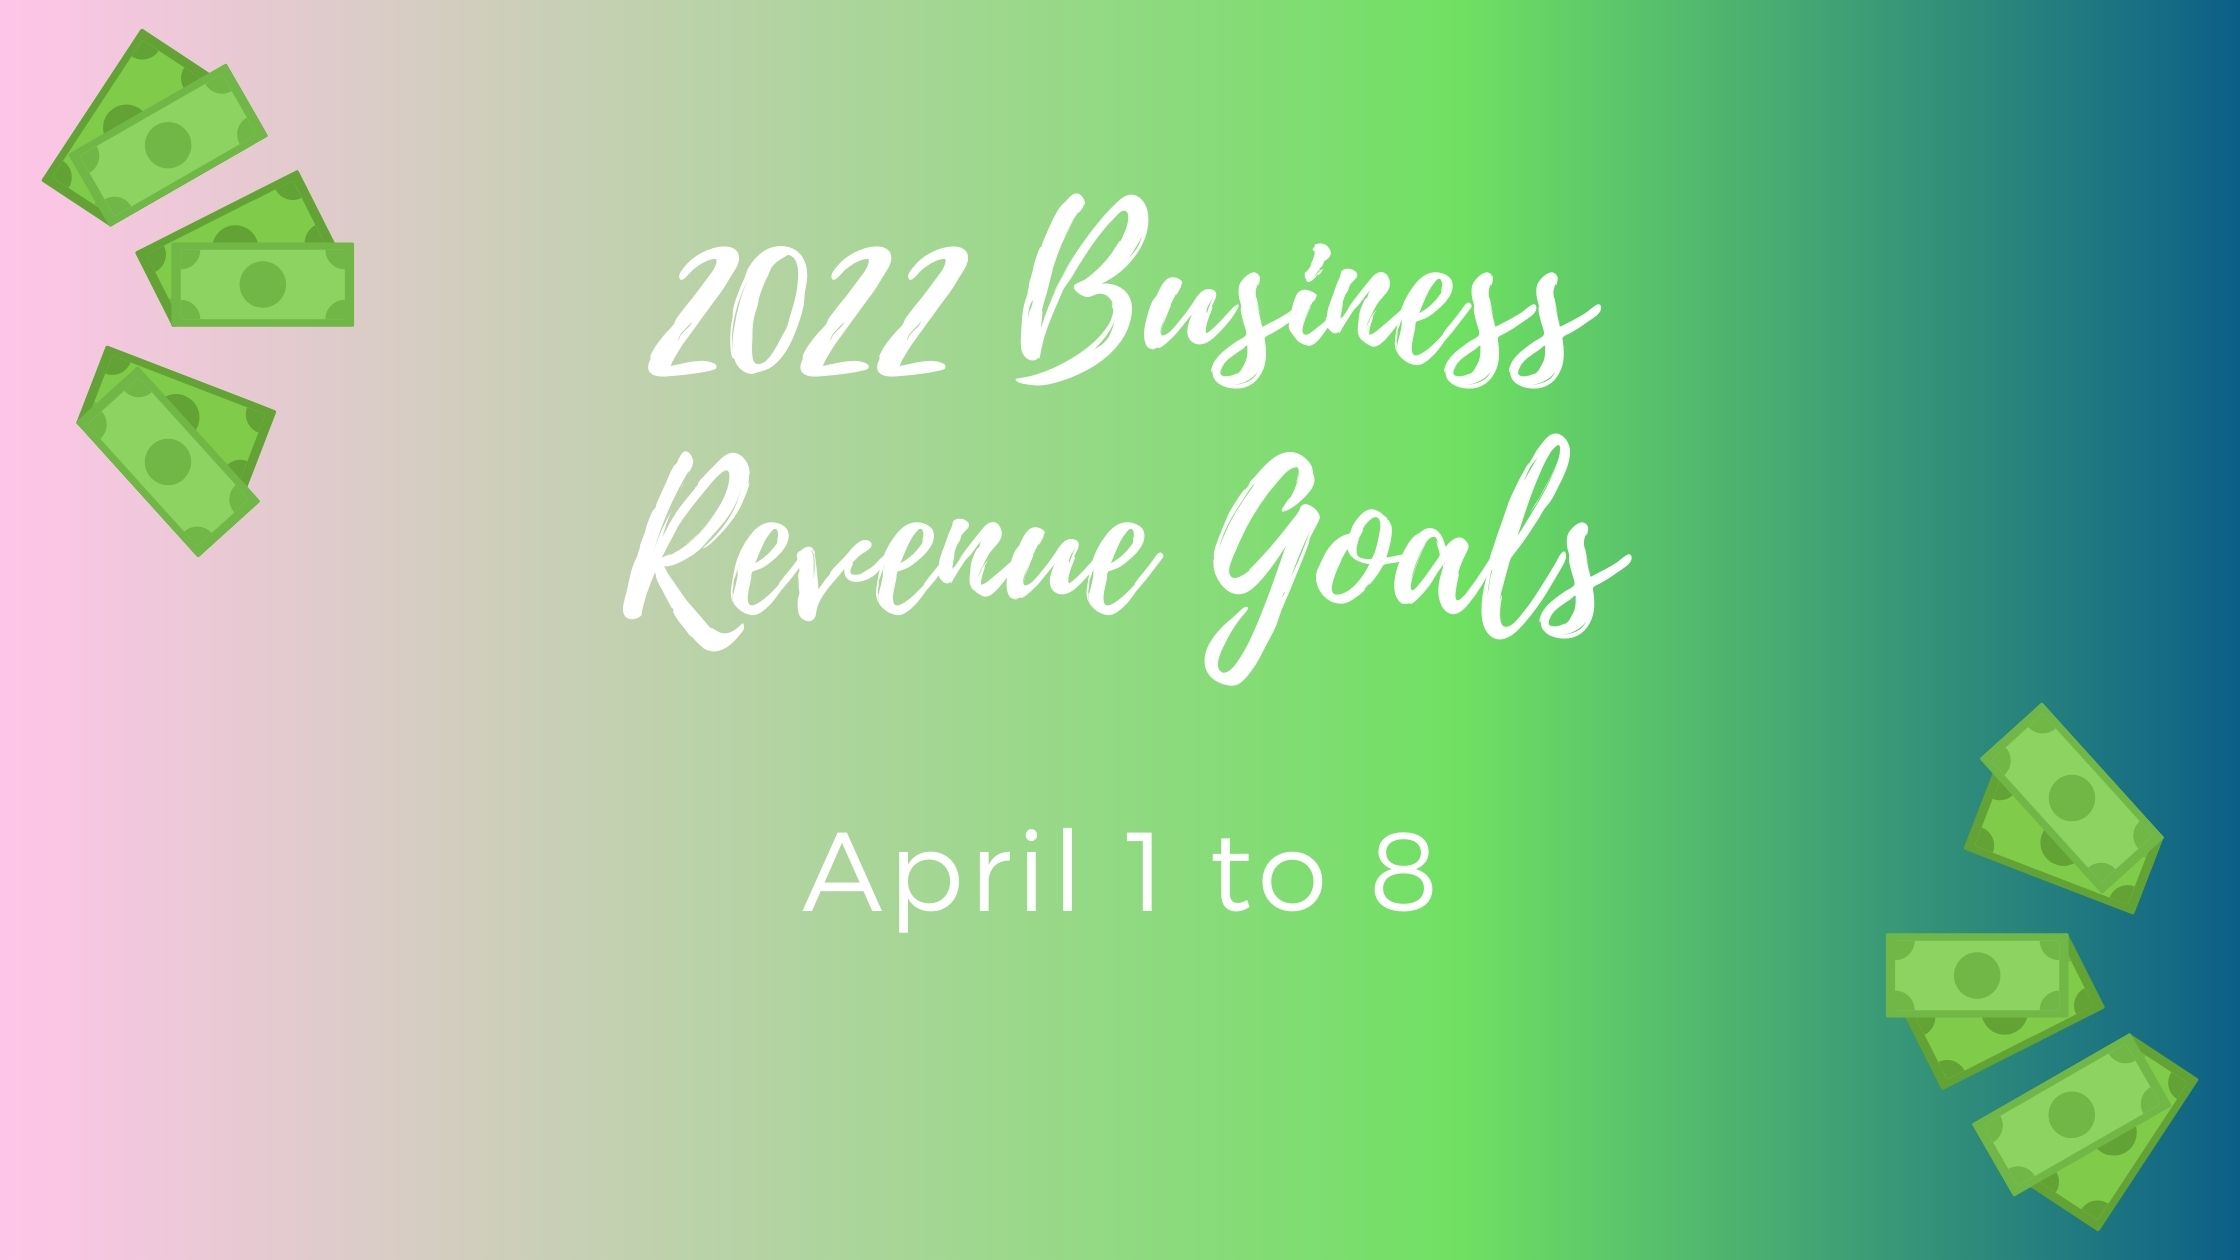 Business Goal Tracking for Week 14 of 2022